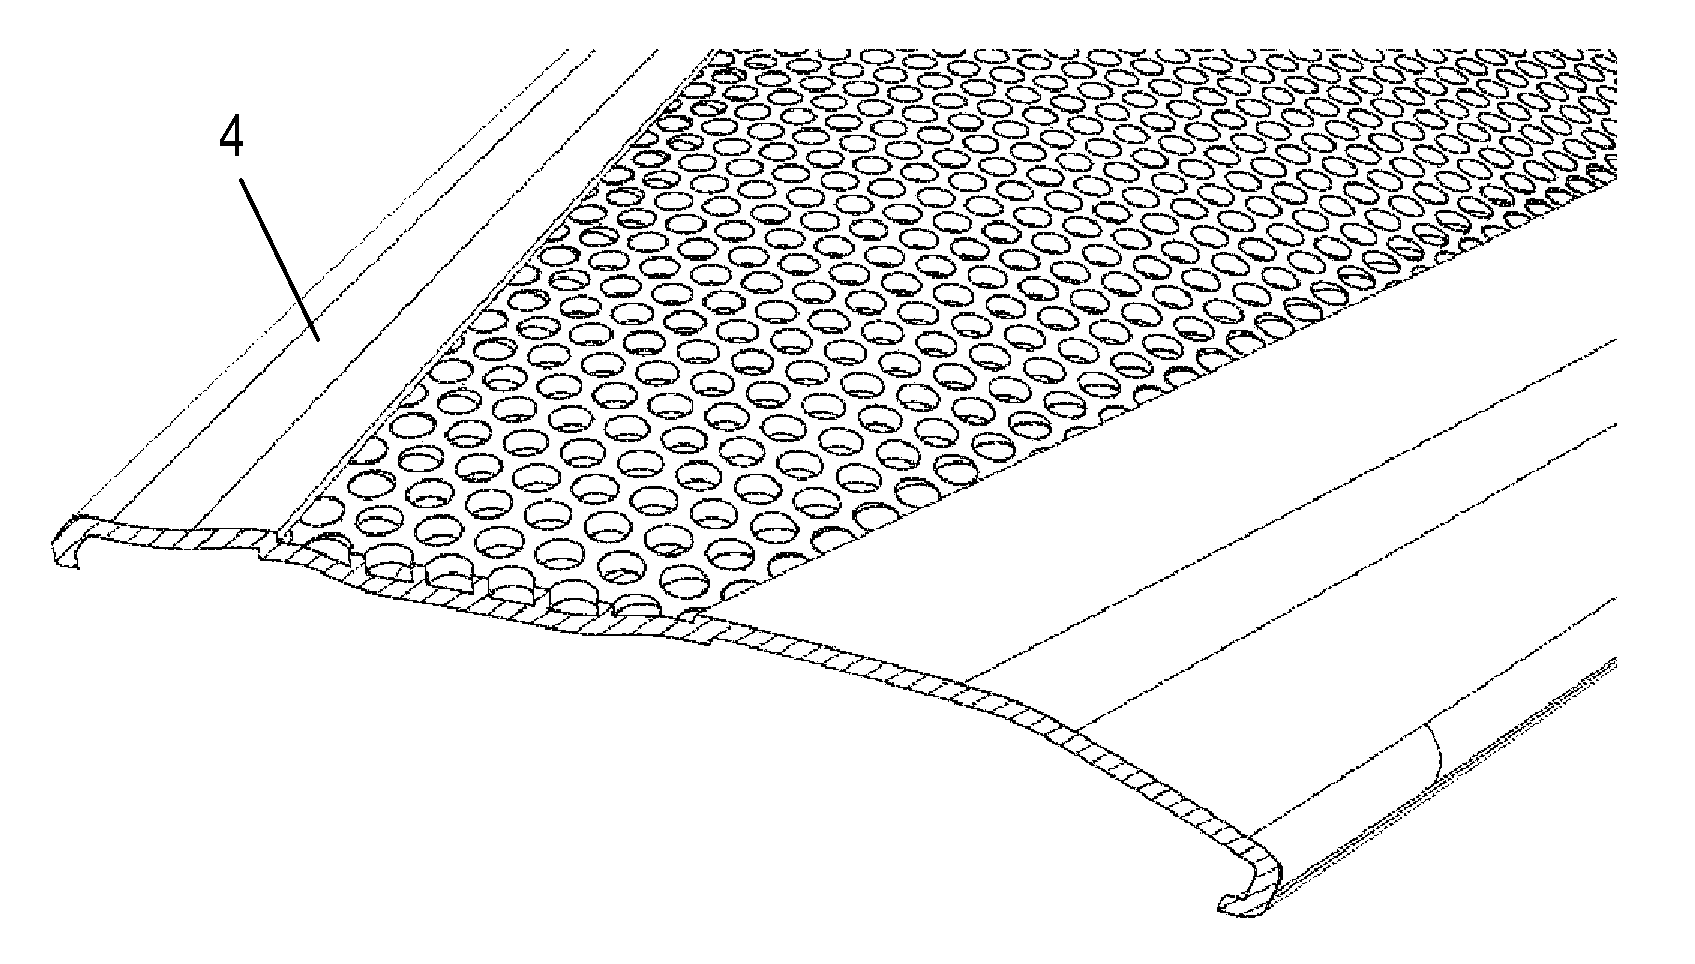 Injection molded cover element with uninterrupted hole pattern